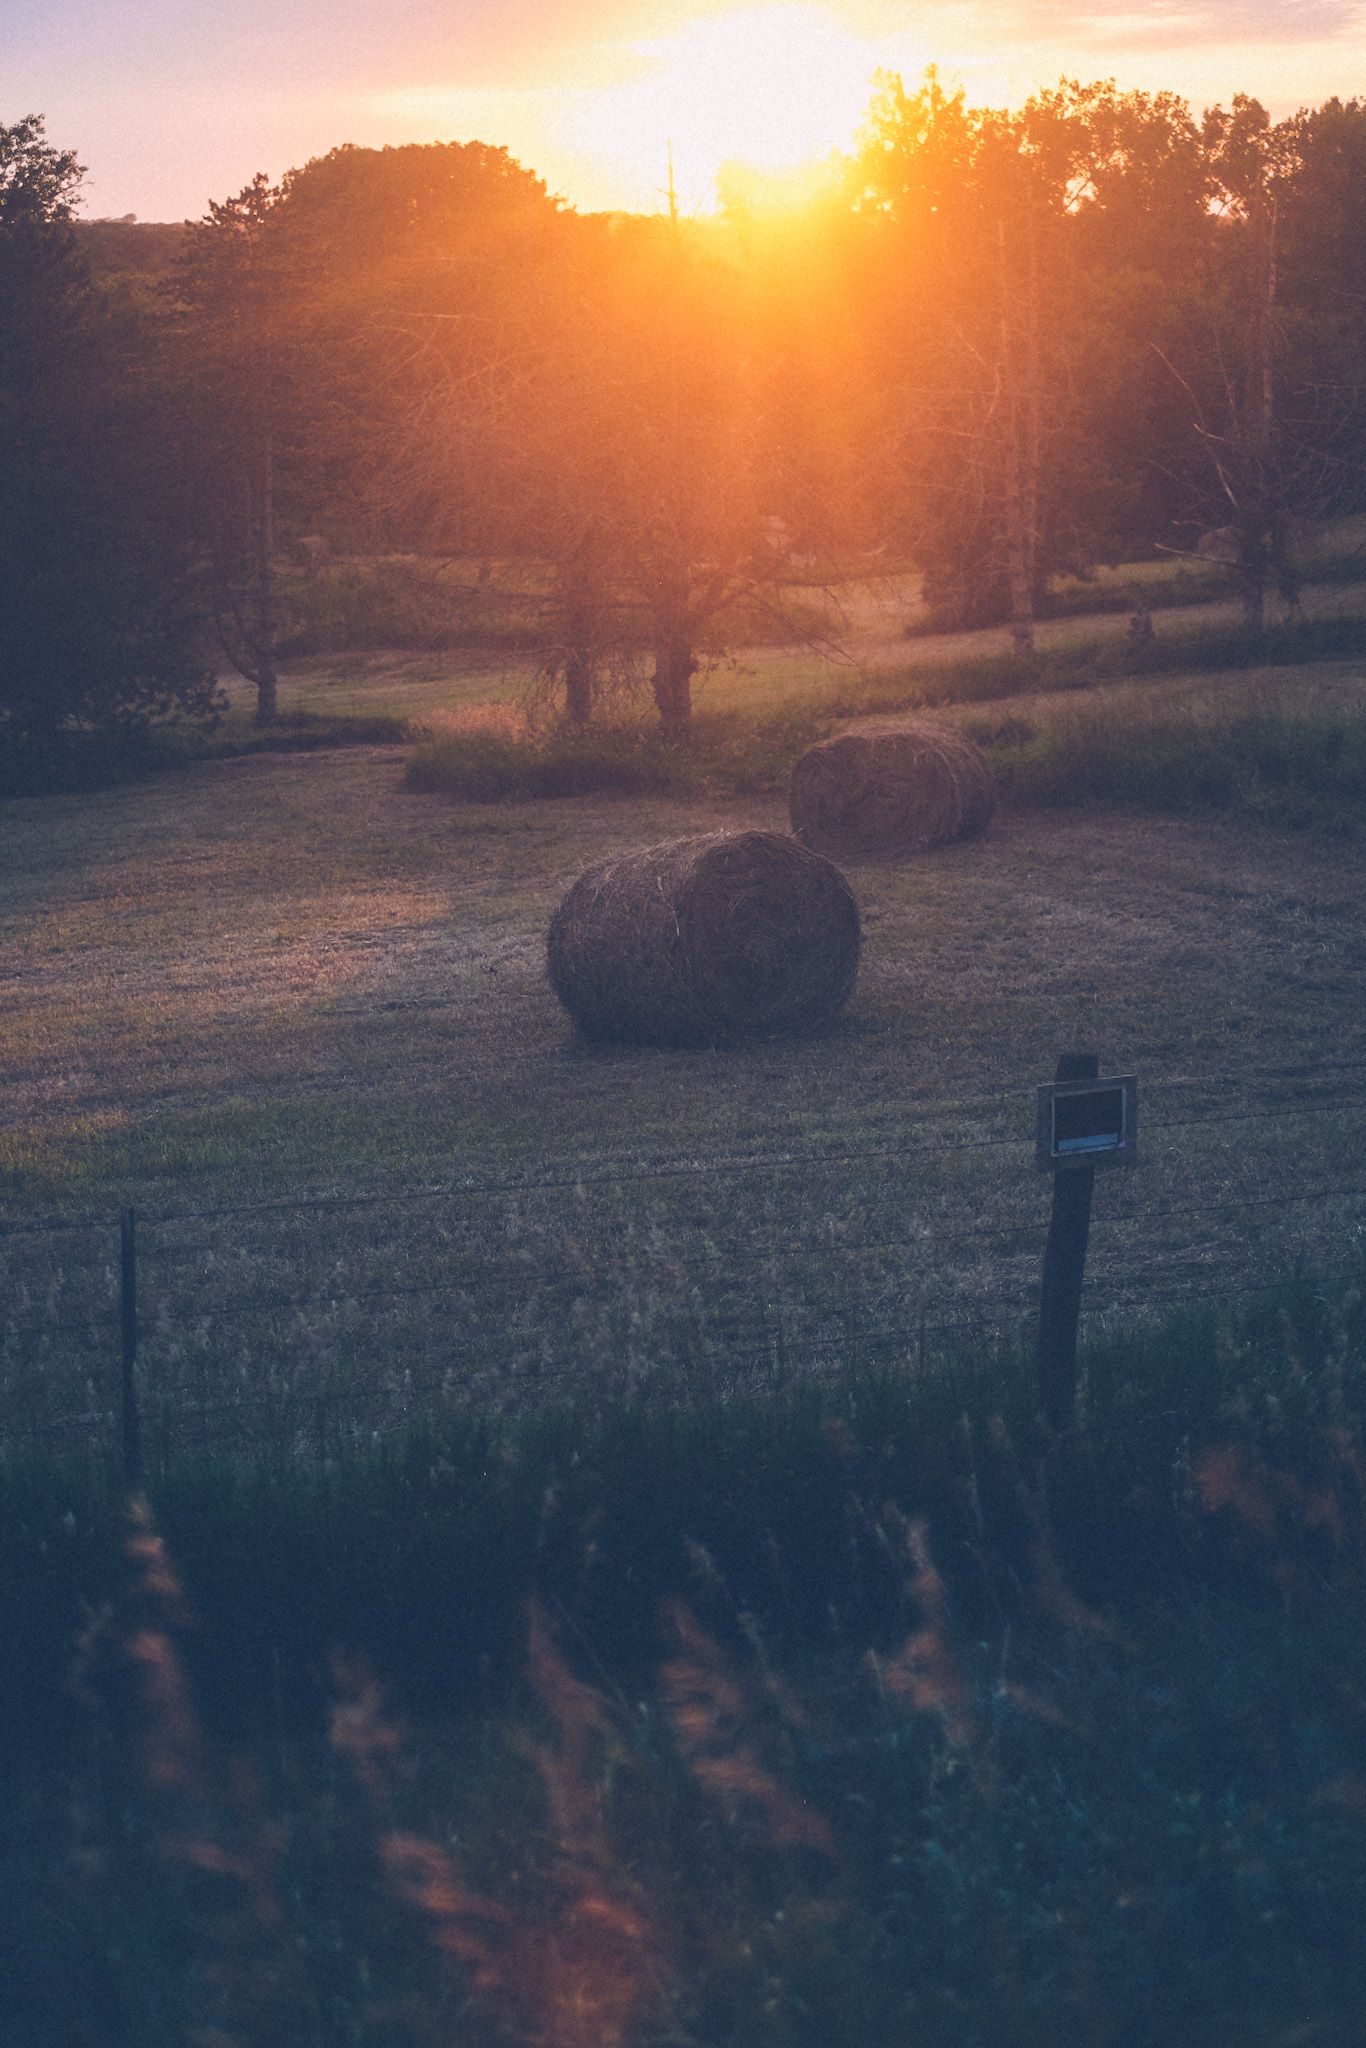 A couple bales of hay lie in a Nebraska field at sunset.